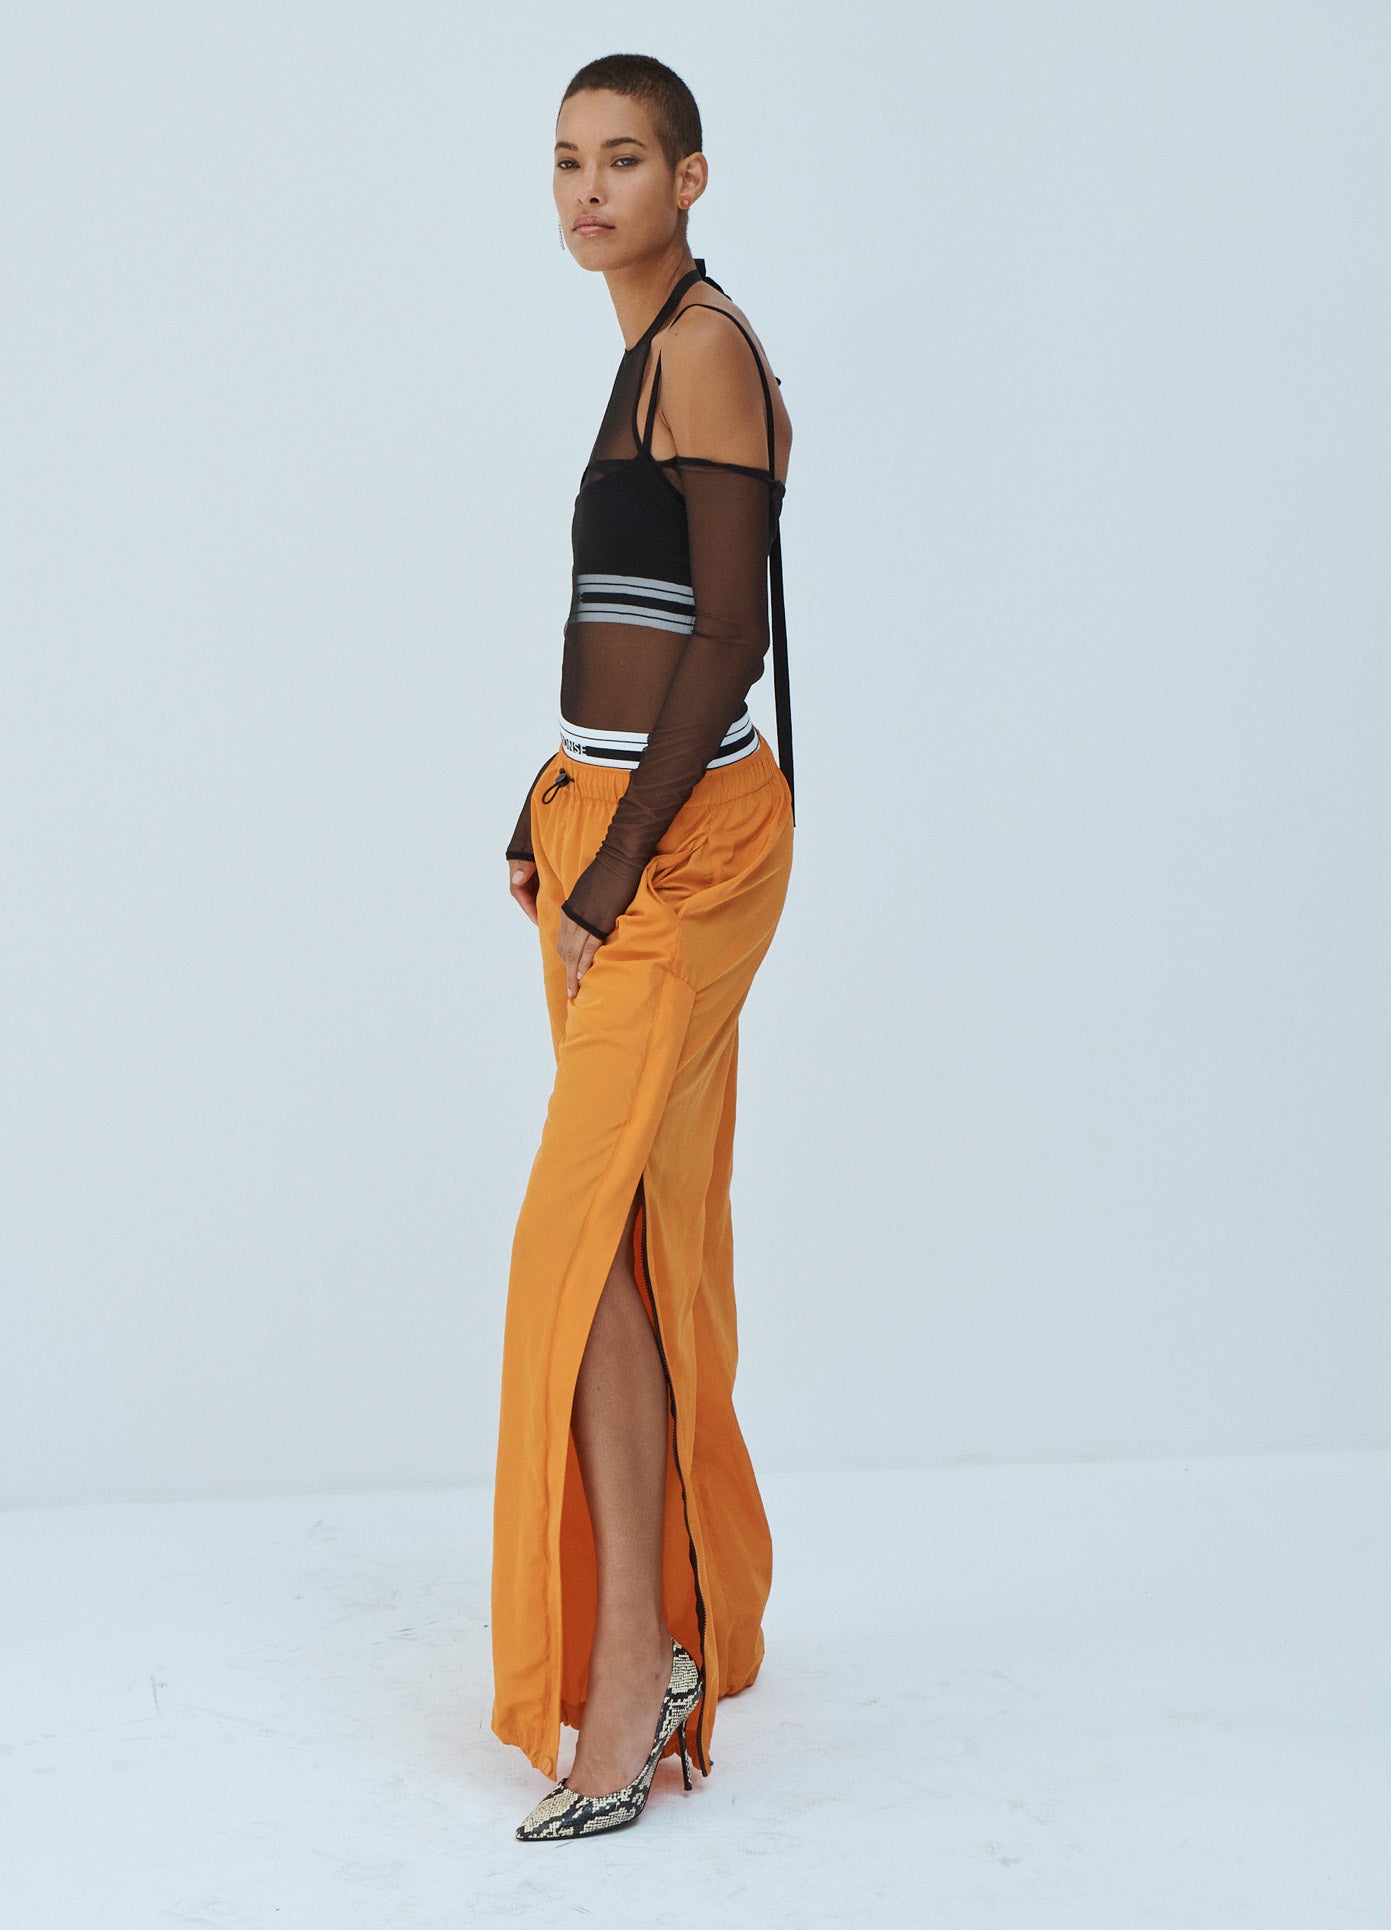 MONSE Techno Waistband Detail Parachute Pant in Orange on Model Side View